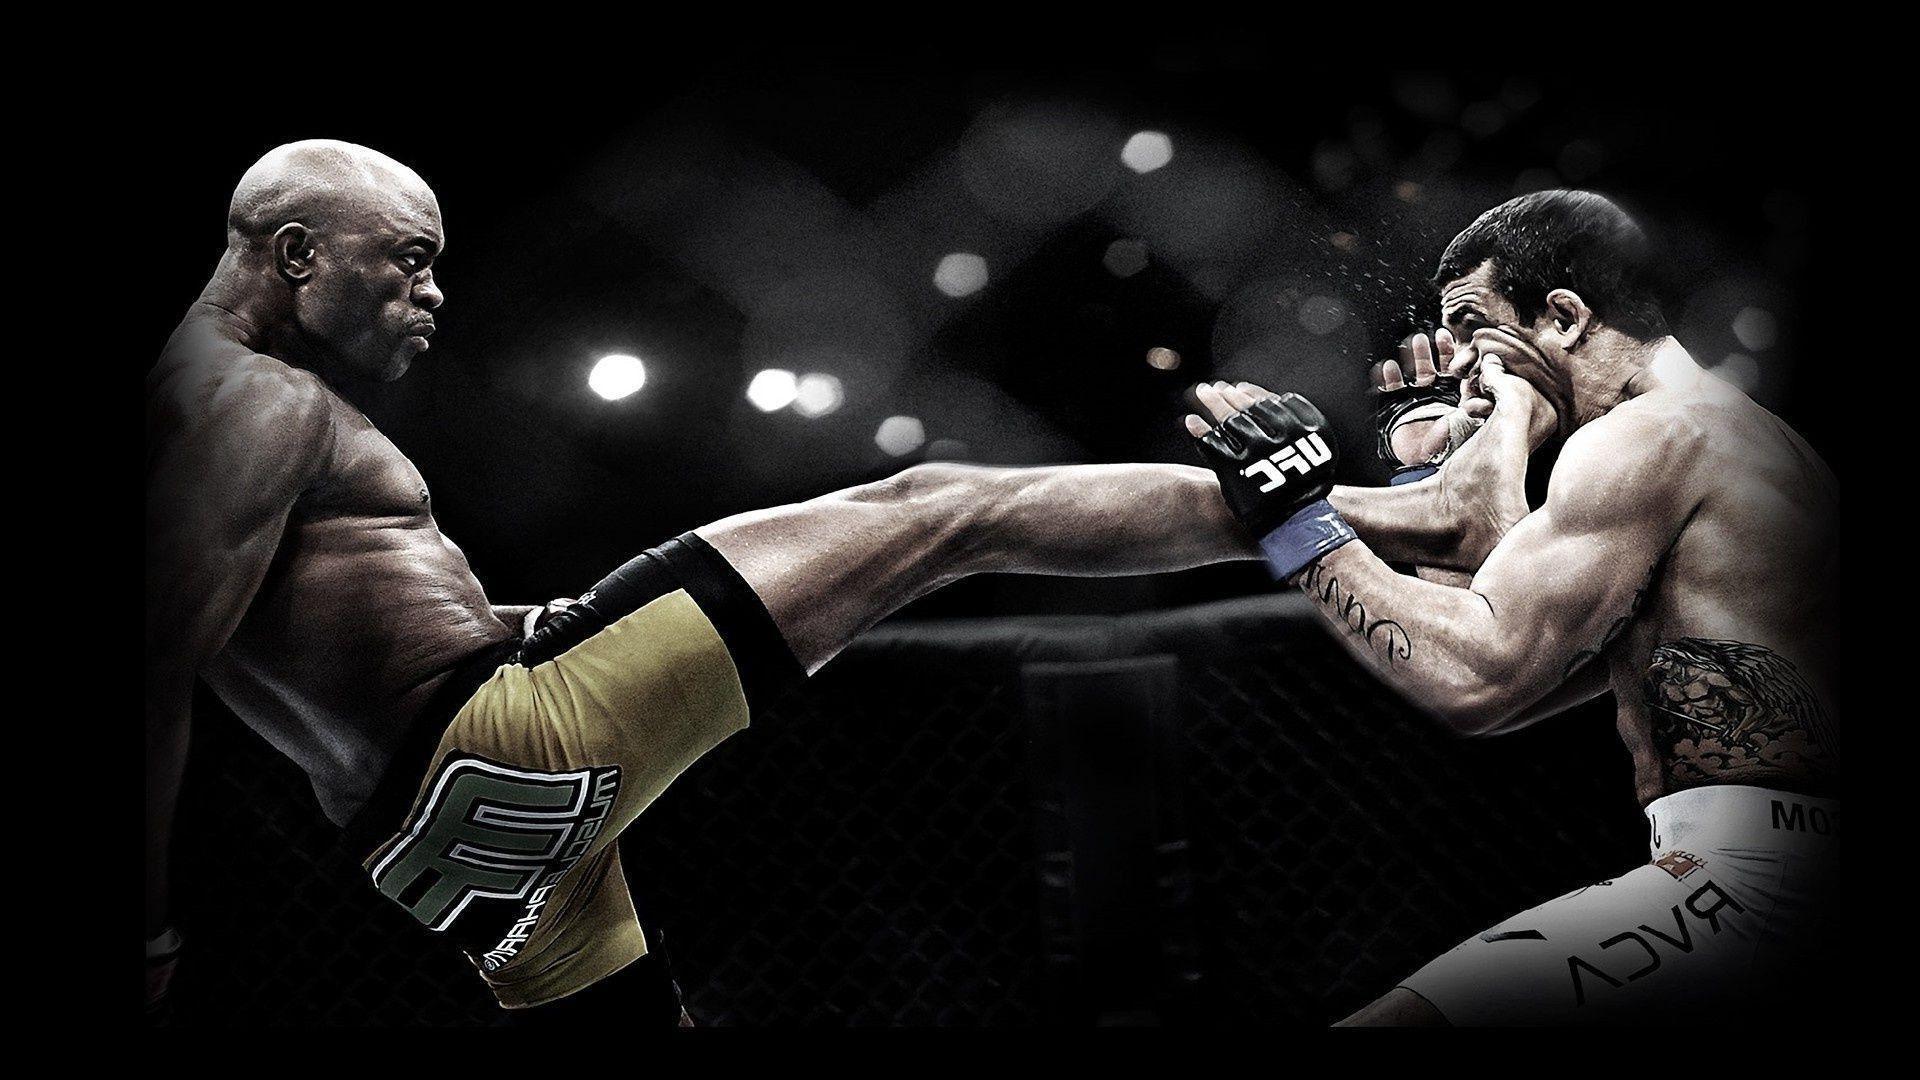 Anderson silva Ufc mix fight Anderson Silva punch mma. Android